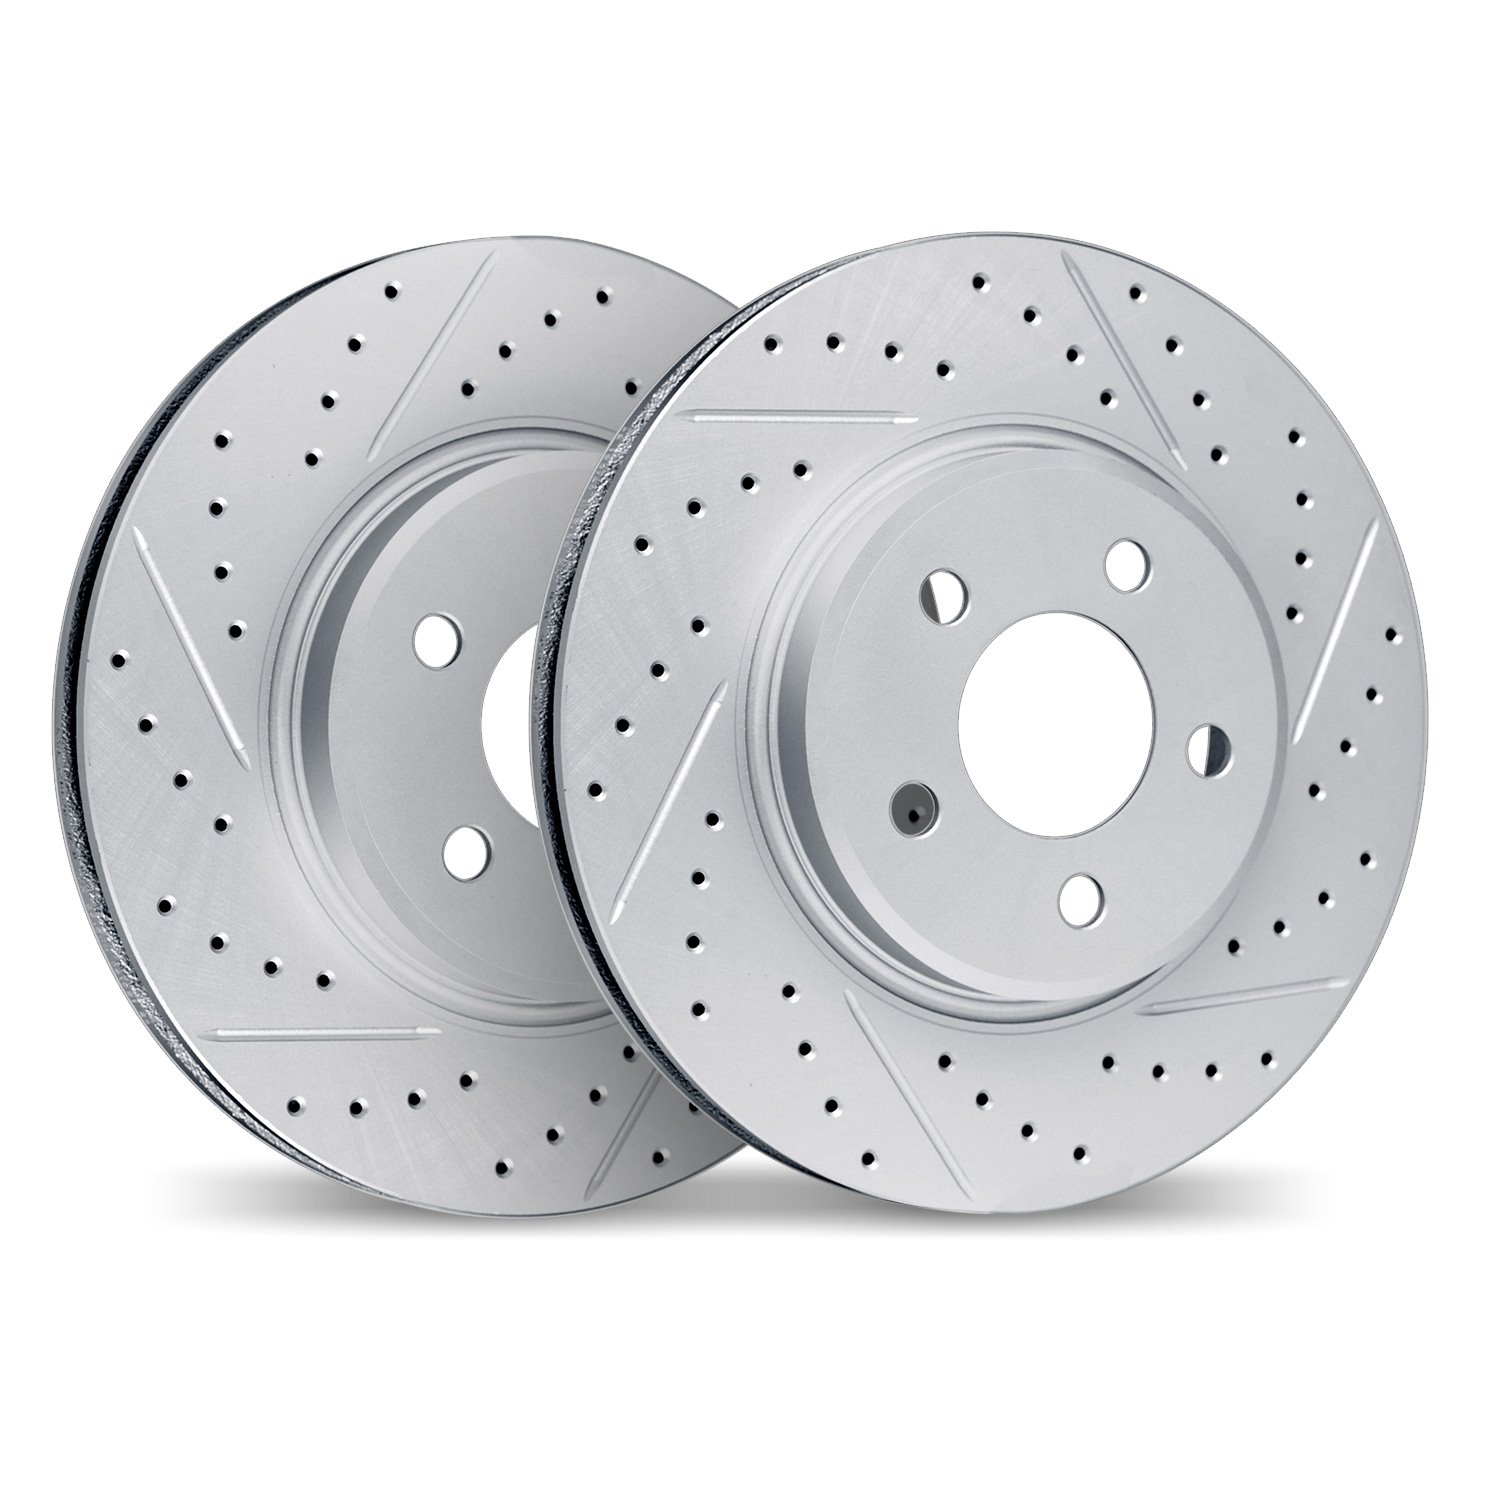 2002-11025 Geoperformance Drilled/Slotted Brake Rotors, 2005-2007 Land Rover, Position: Rear